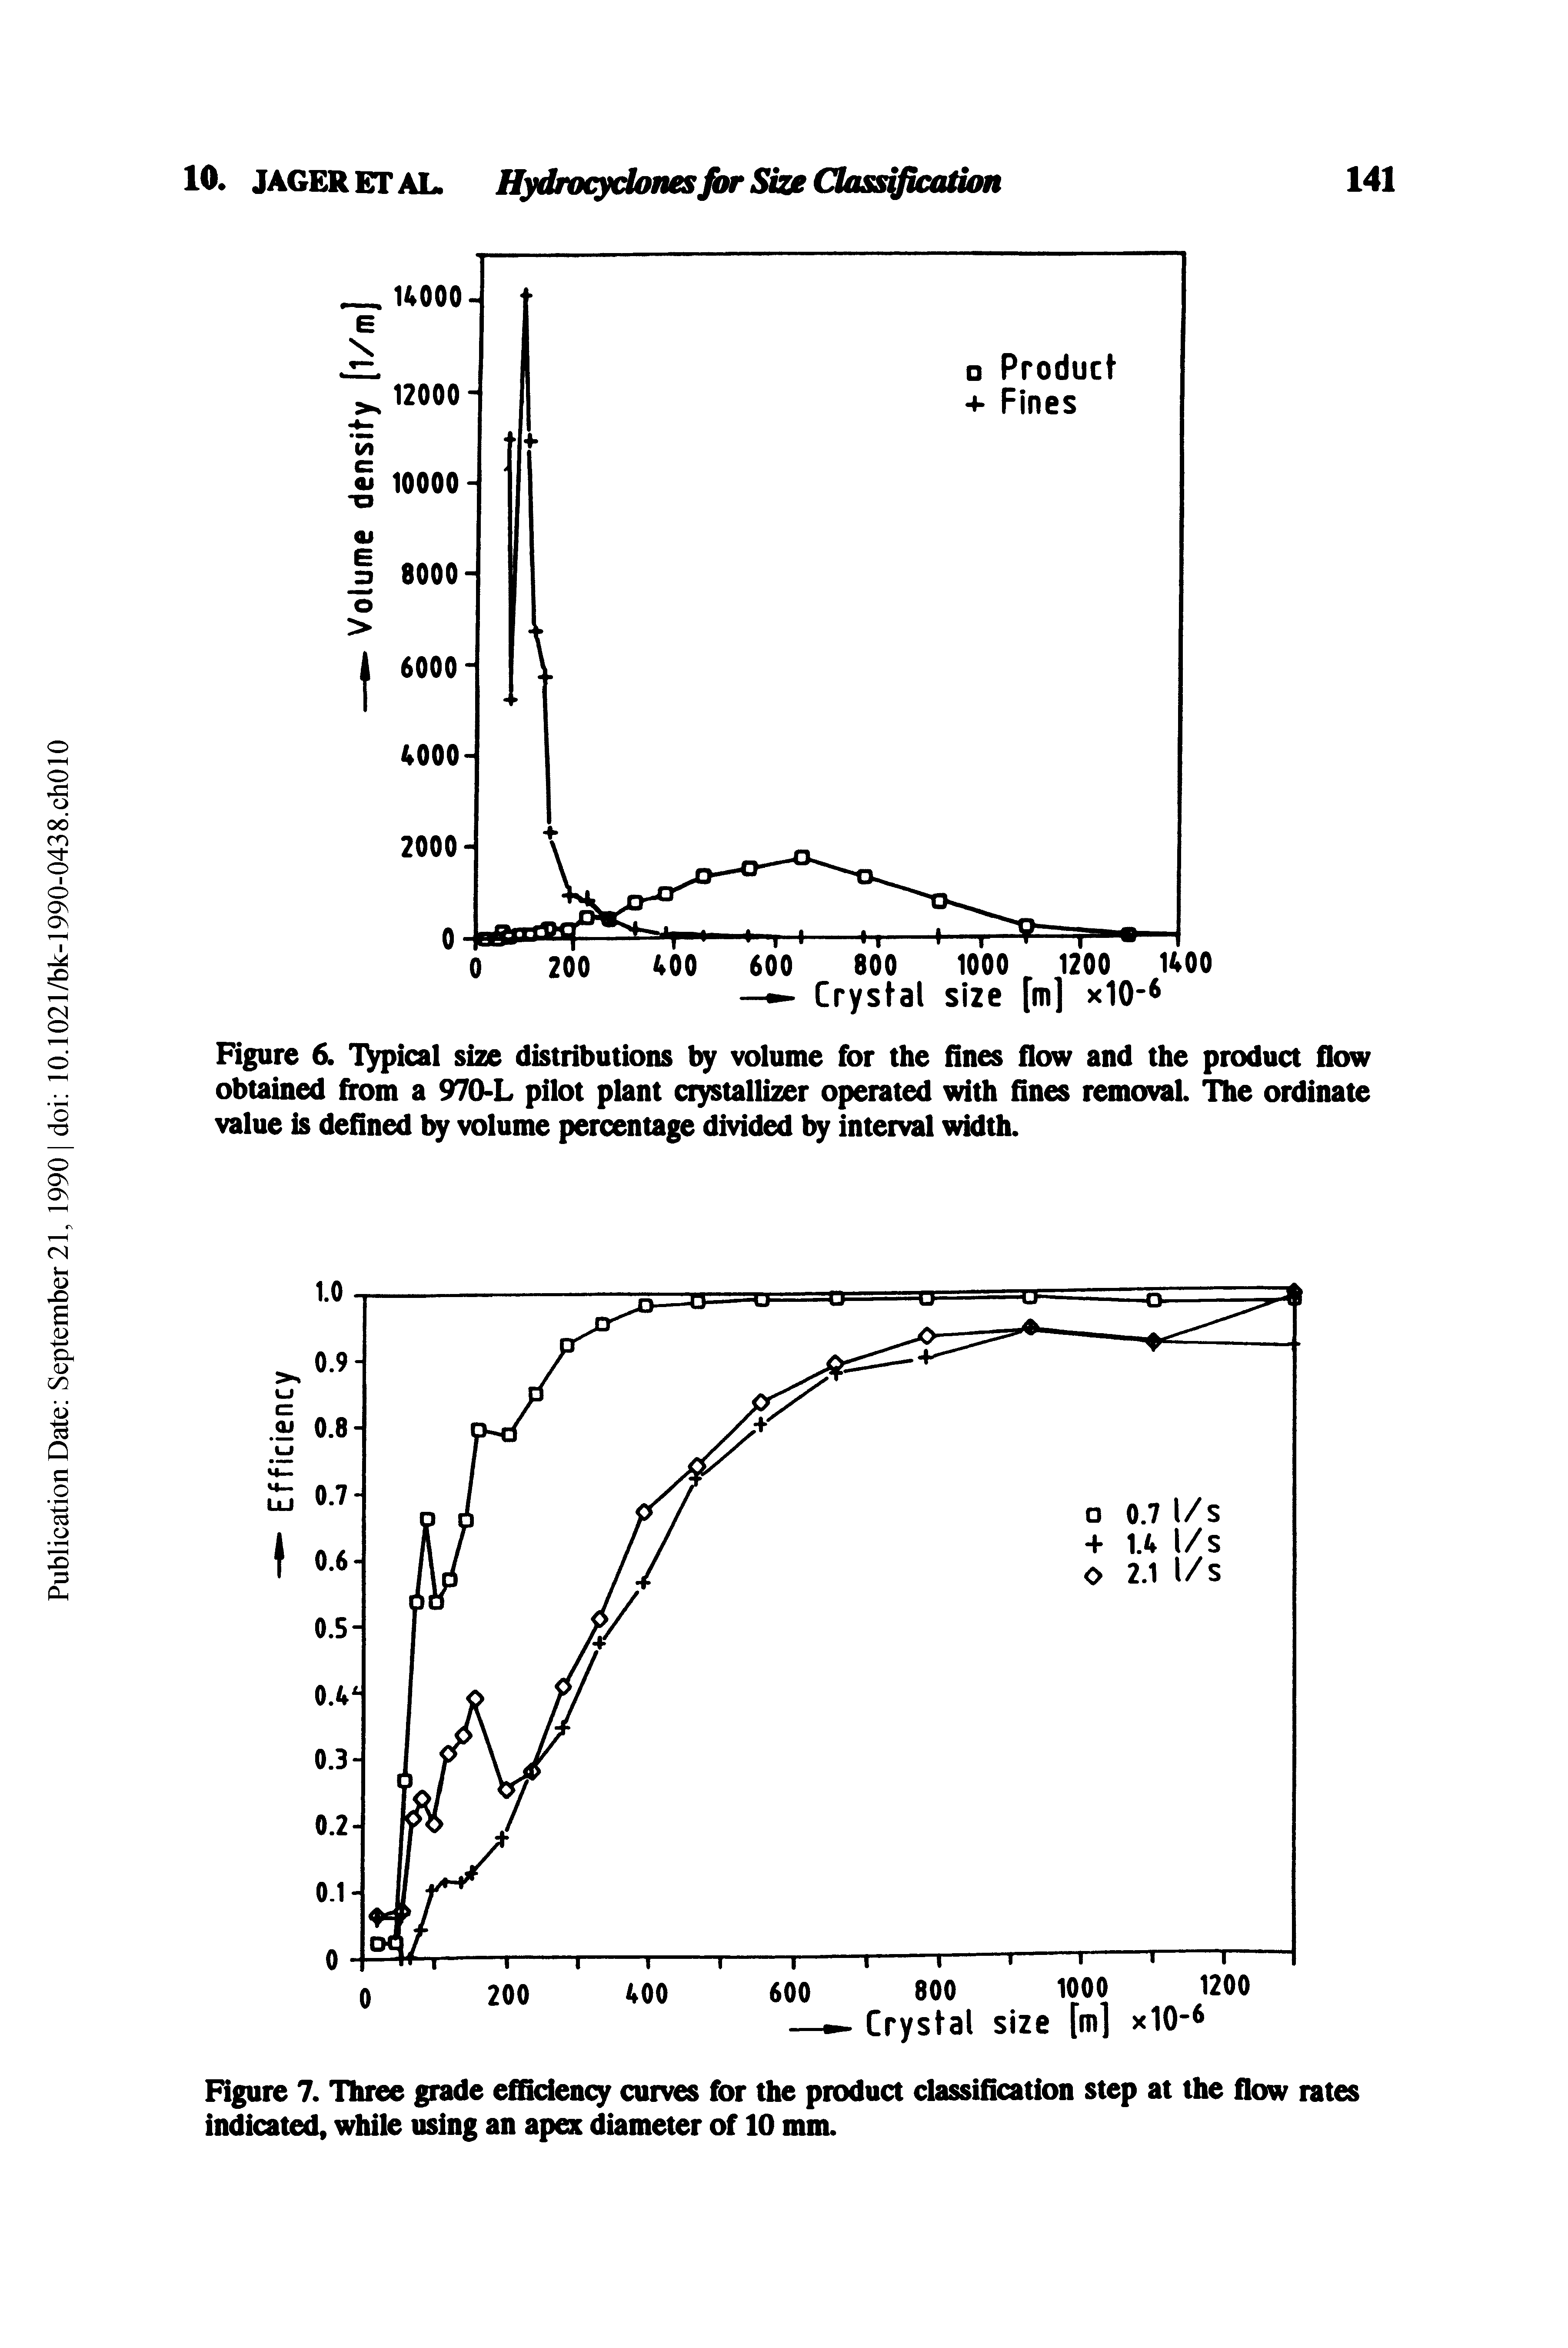 Figure 7. Three grade efficiency curves for the product classification step at the flow rates indicated, while using an apex diameter of 10 mm.